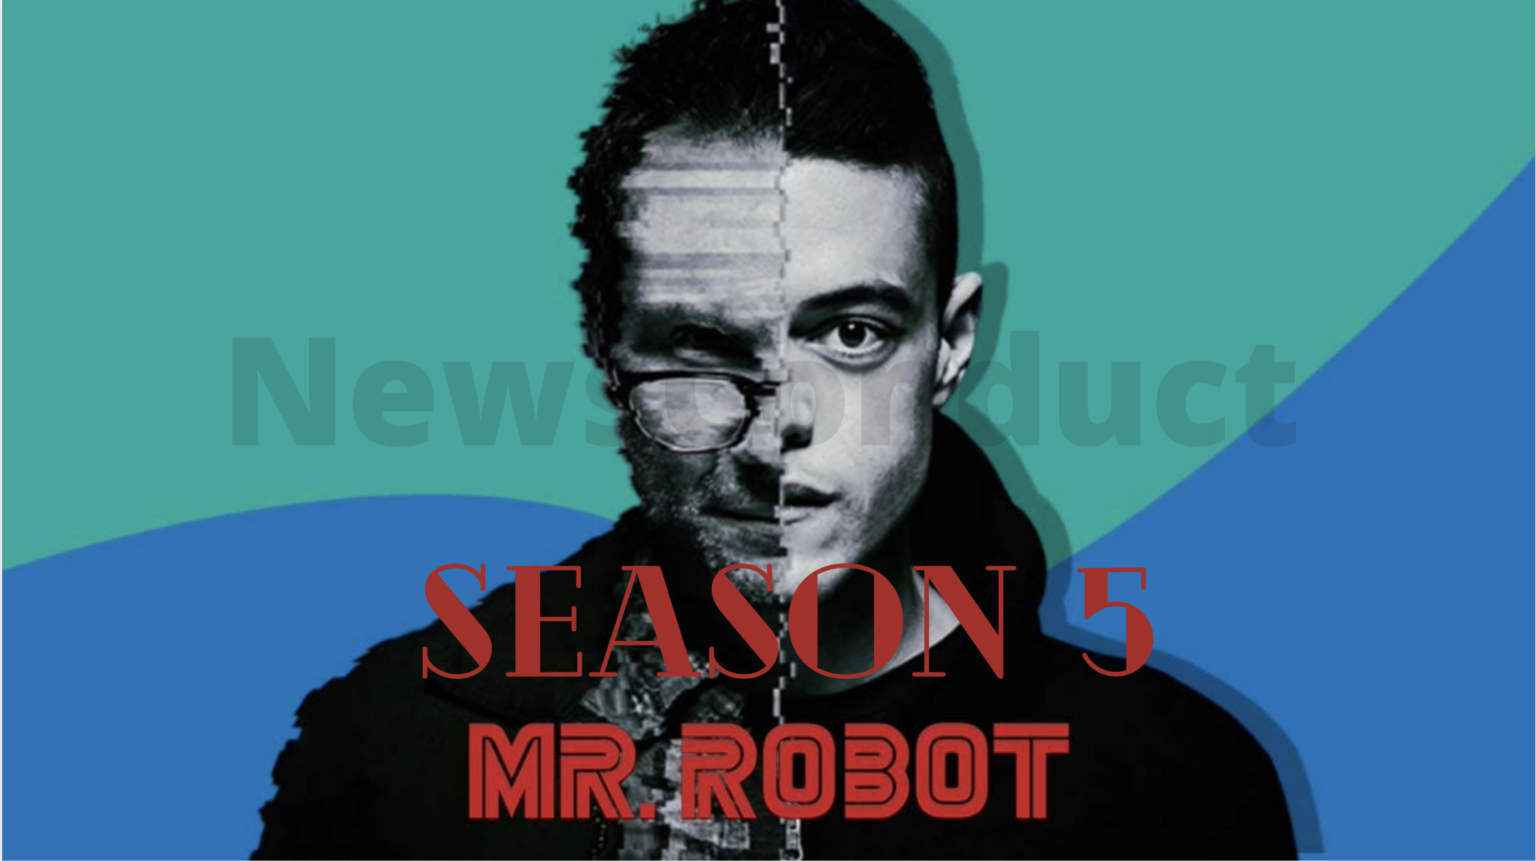 Mr. Robot season 5 has been canceled in 2019 after the finale of season 4. So, there is no chance that we will be witnessing Mr. Robot's season 5.